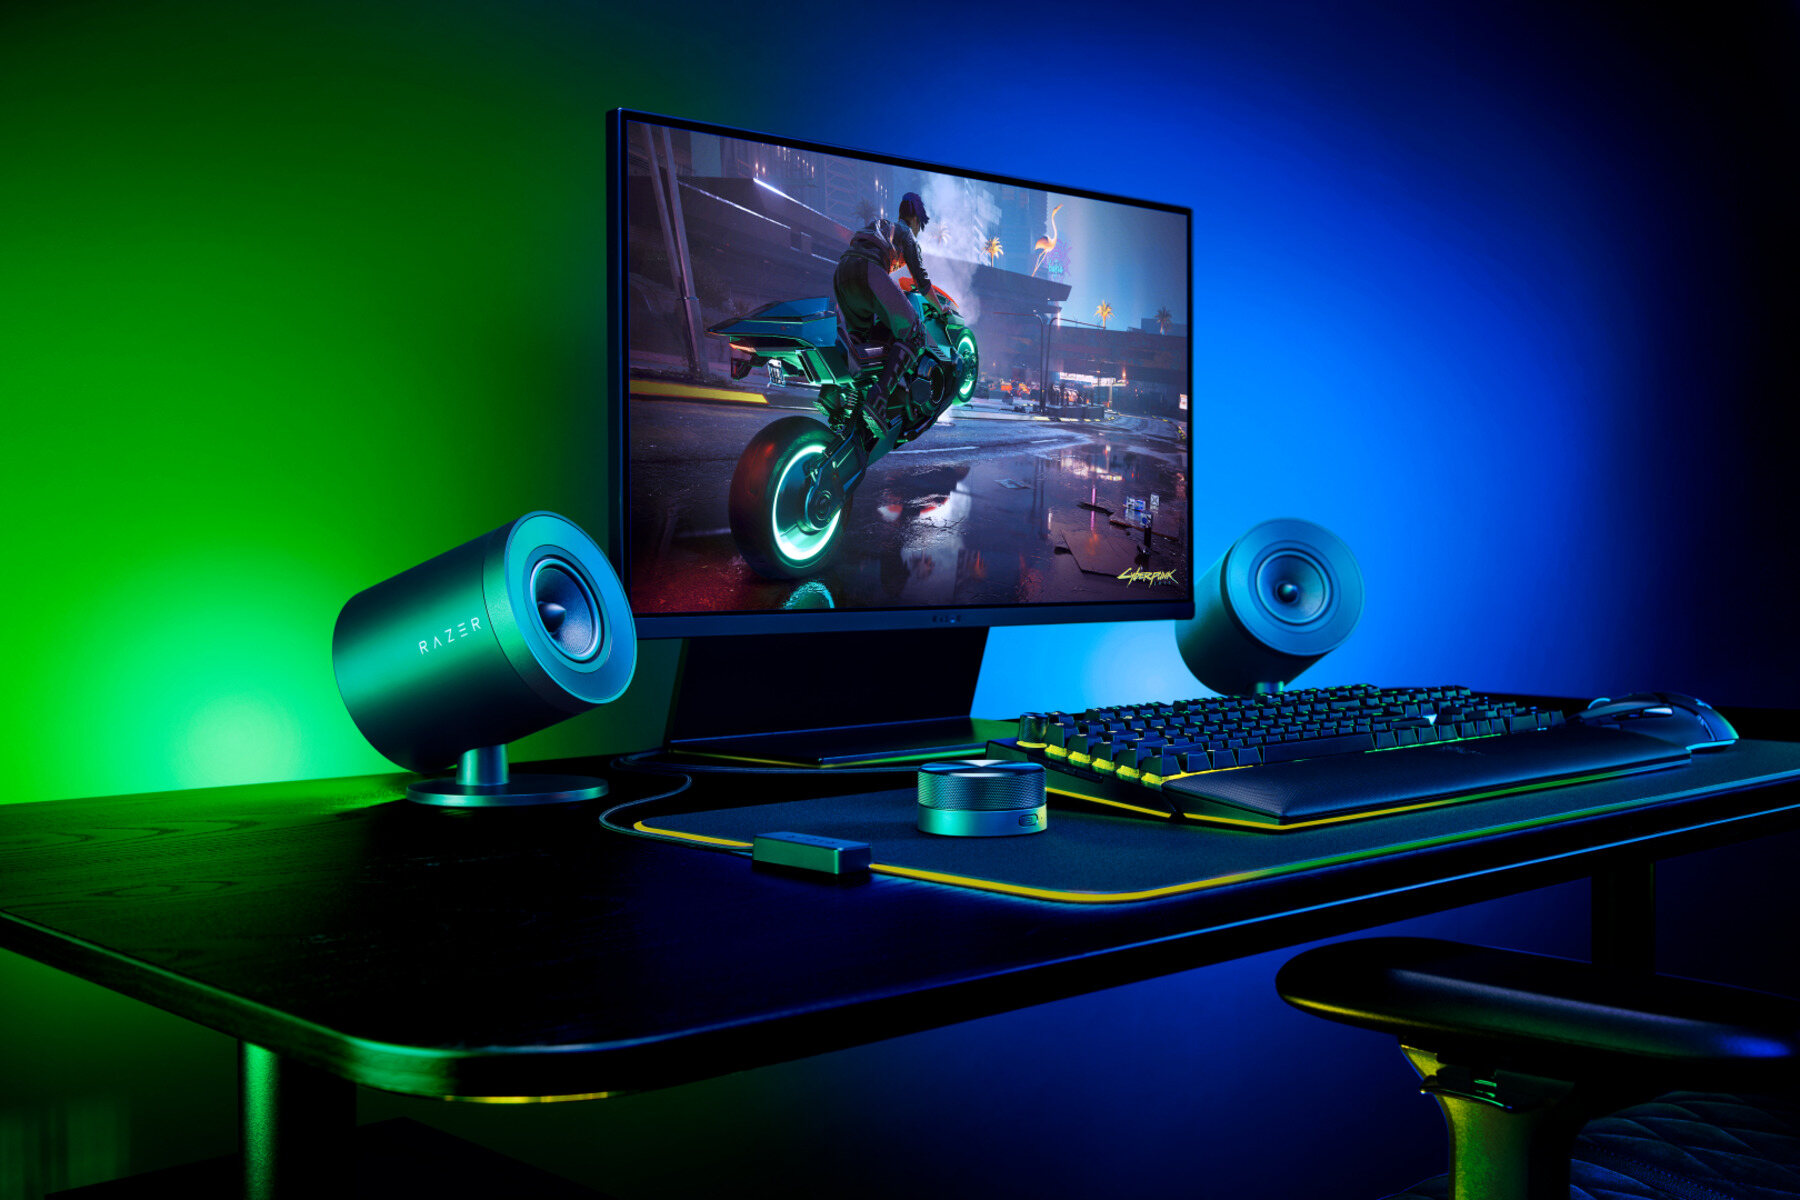 razer-nommo-pro-chroma-review-a-beautiful-desk-ornament-with-speakers-built-in